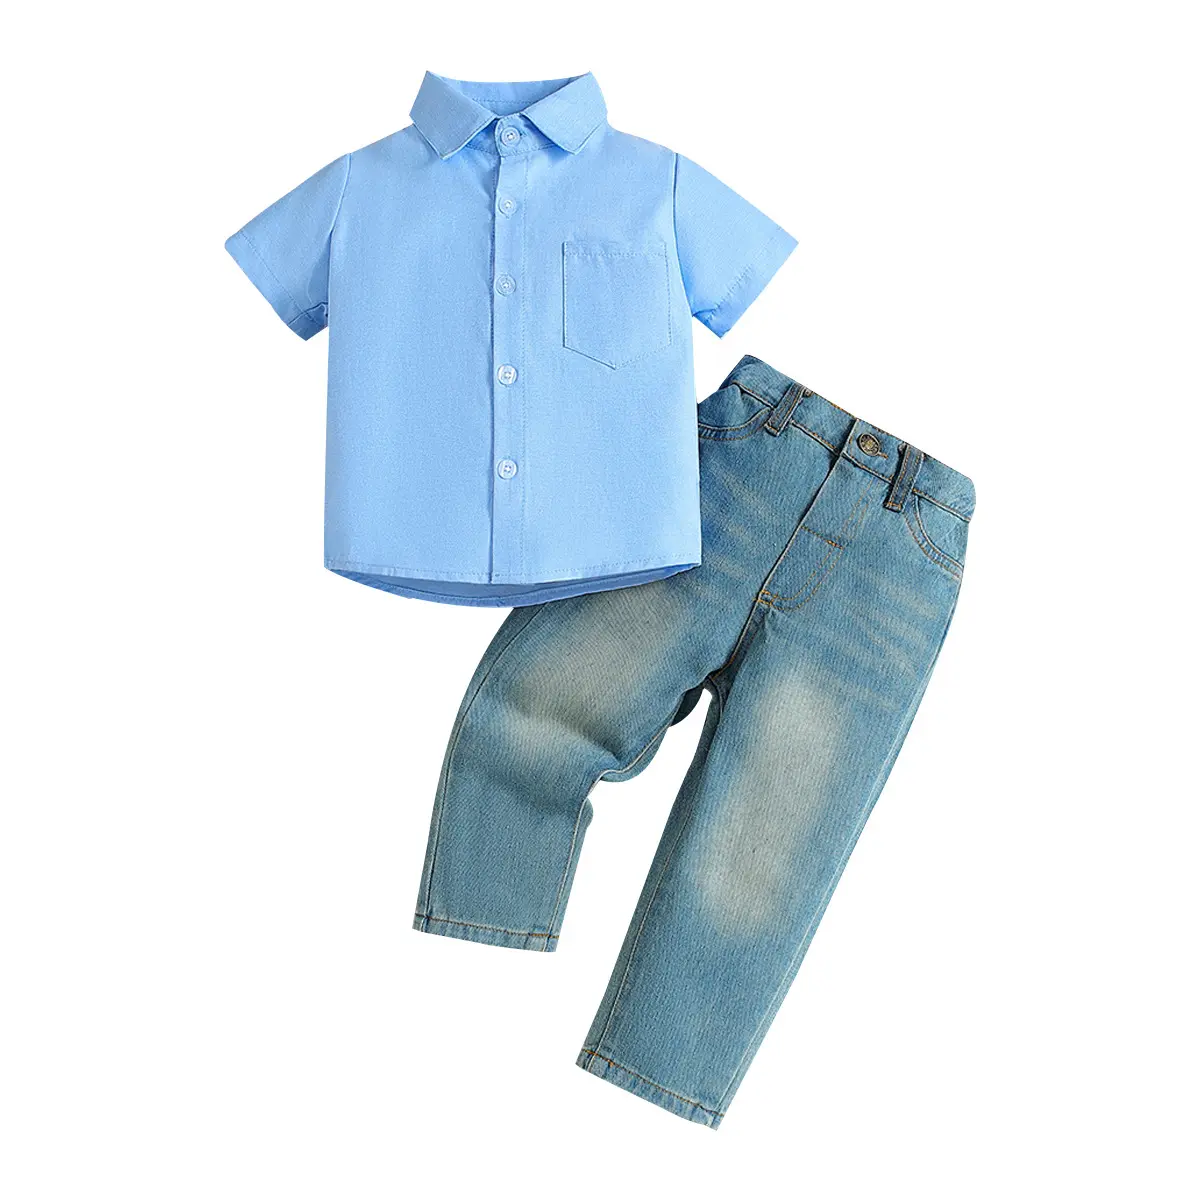 toddlers t shirt suits children wear kids clothing denim outfits boys jeans baby boy clothes for summer 12 -18 months